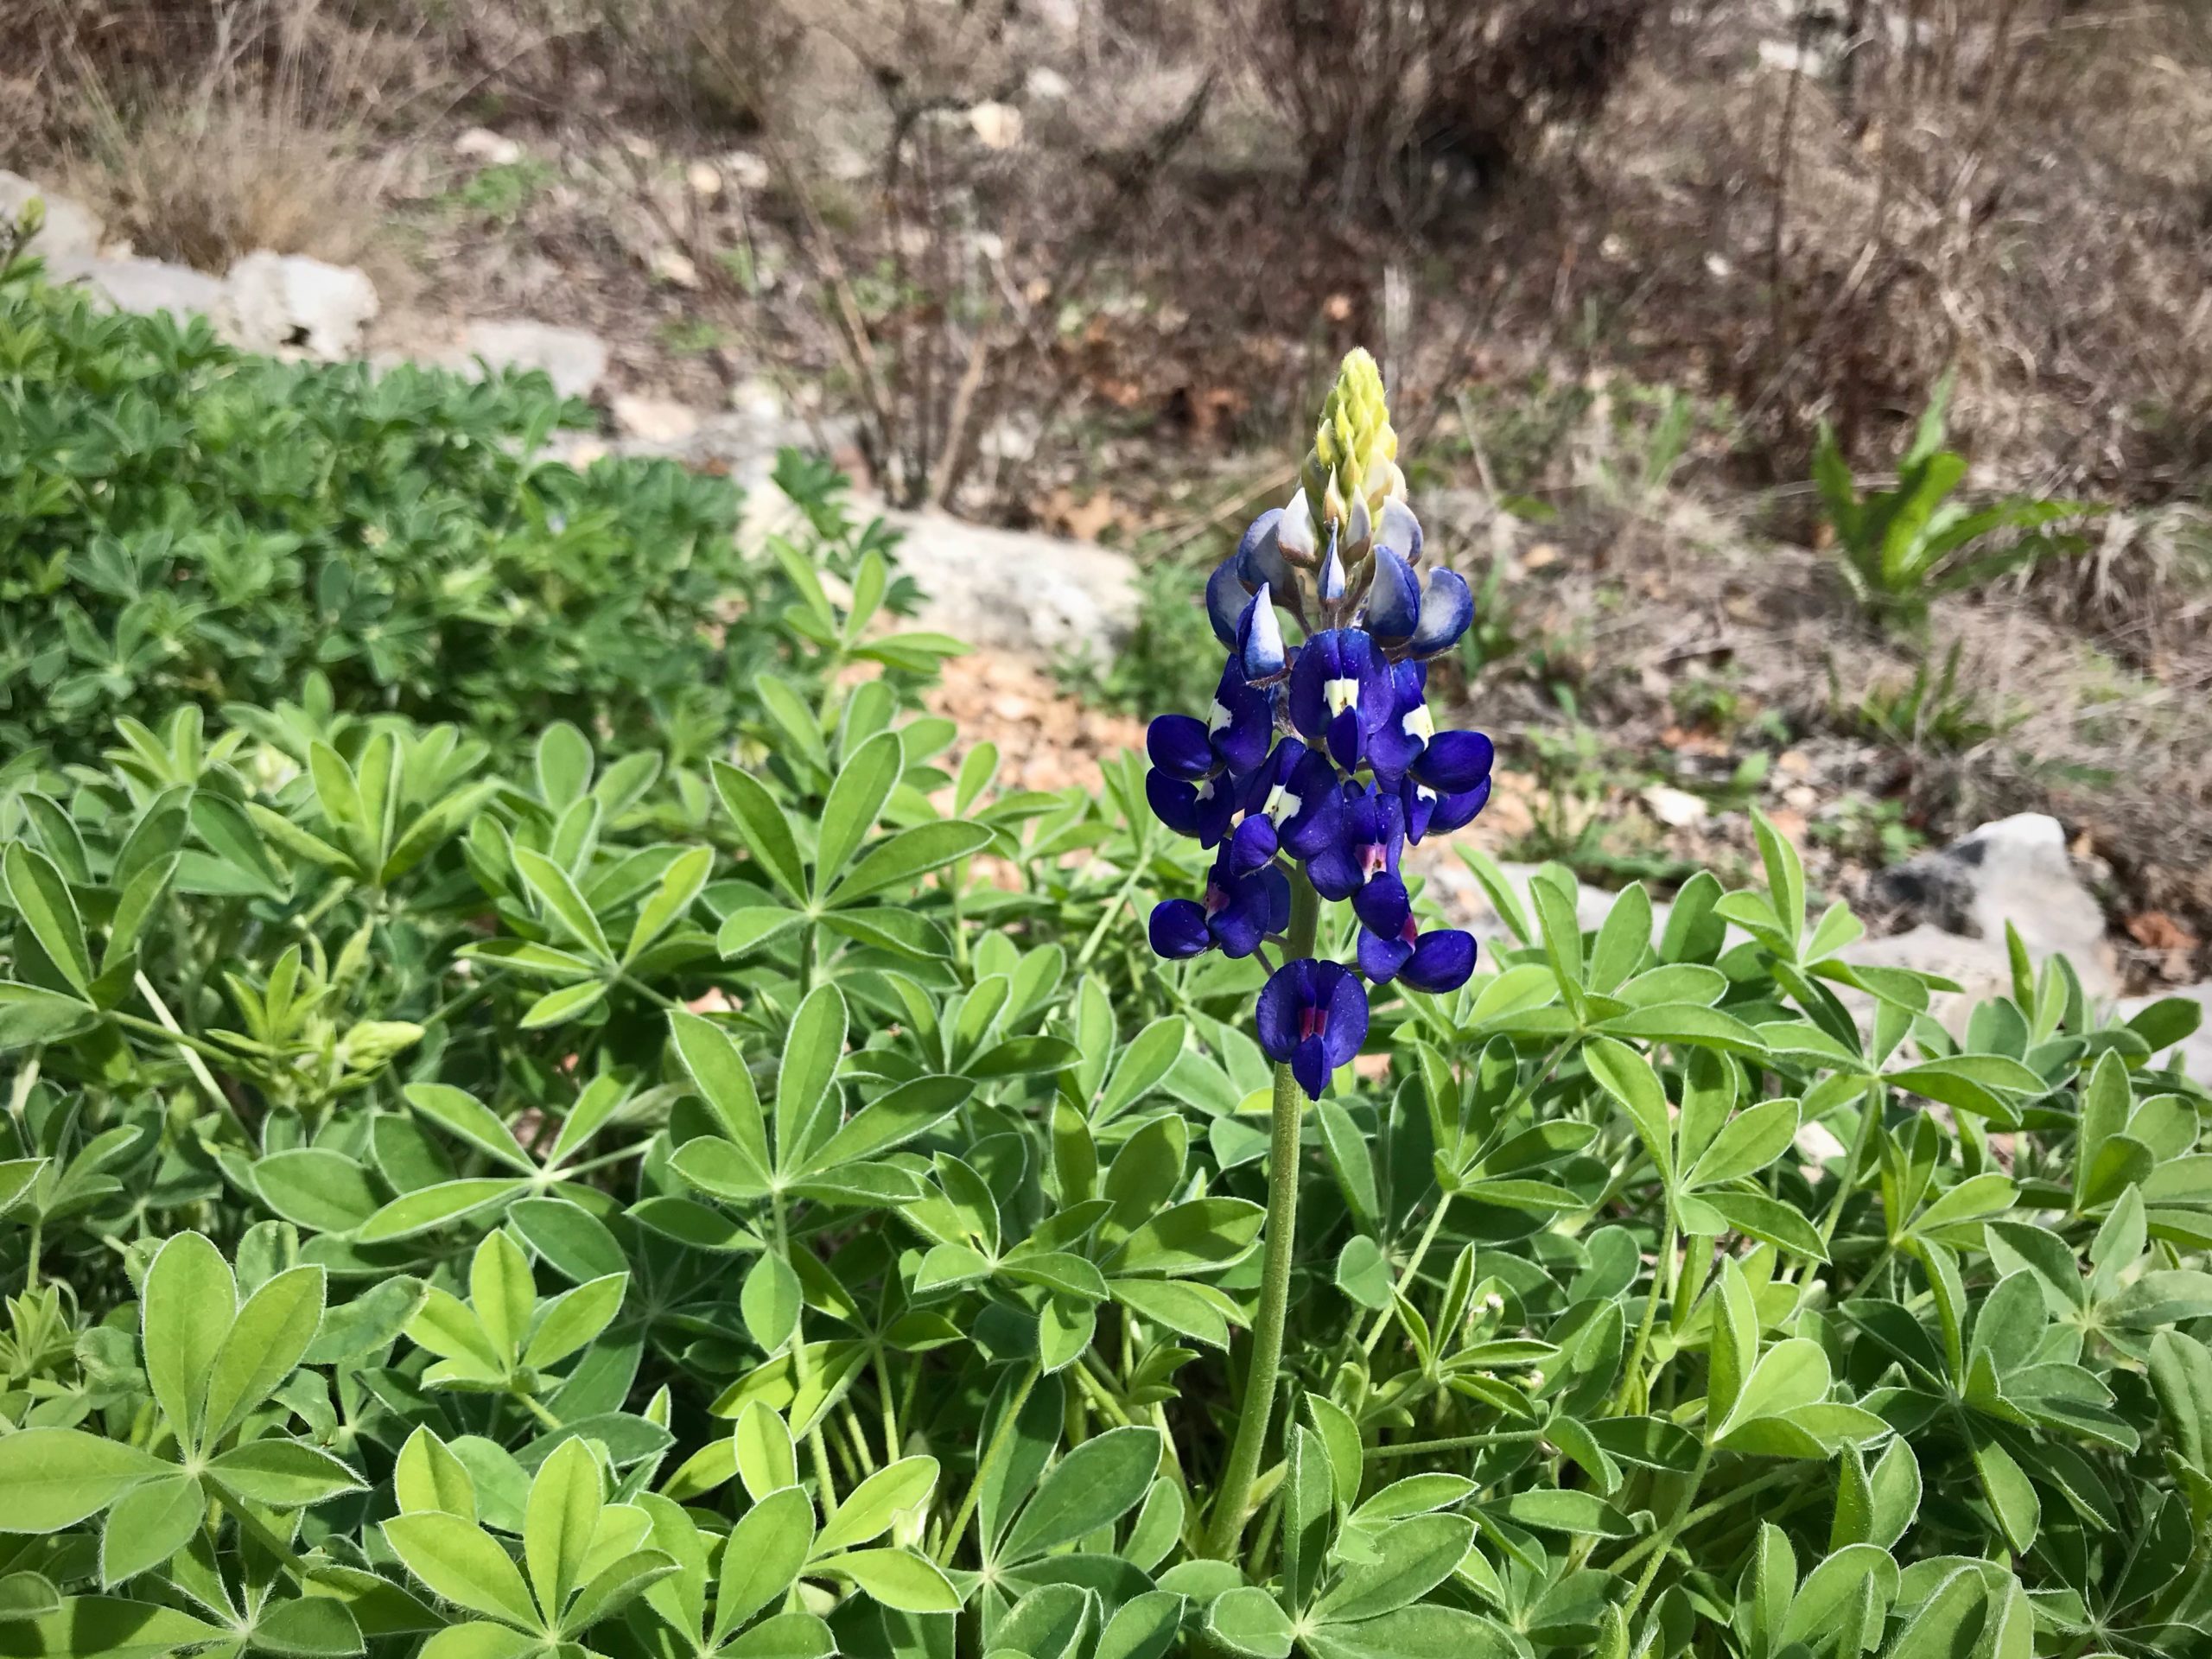 Texas hill country Bluebonnets!